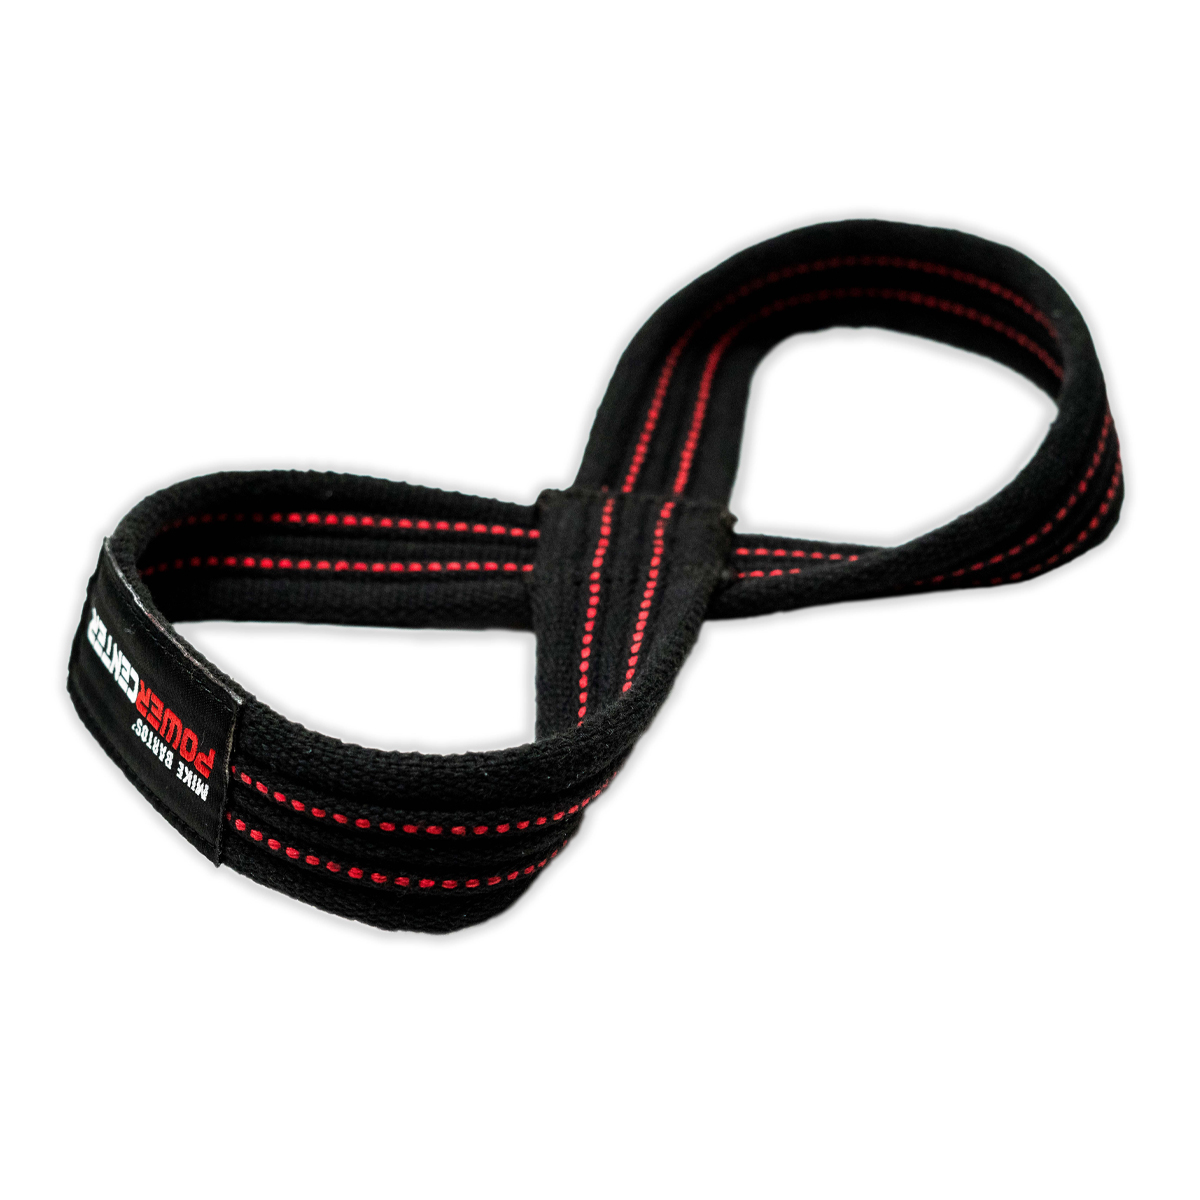 Shop Figure 8 Strap at FITNESS FOX